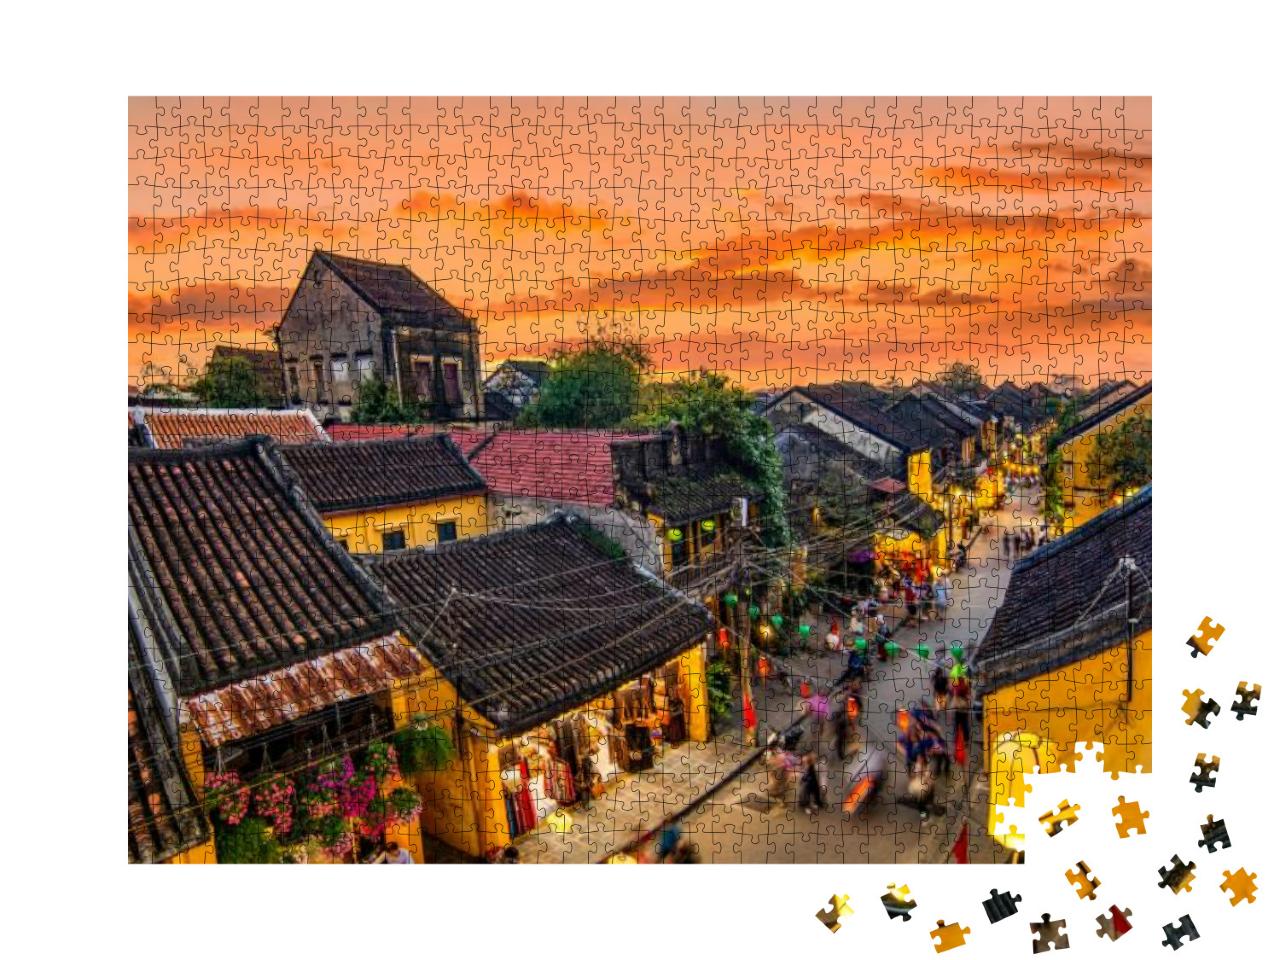 Hoi An, Vietnam High View of Hoi an Ancient Town Which is... Jigsaw Puzzle with 1000 pieces